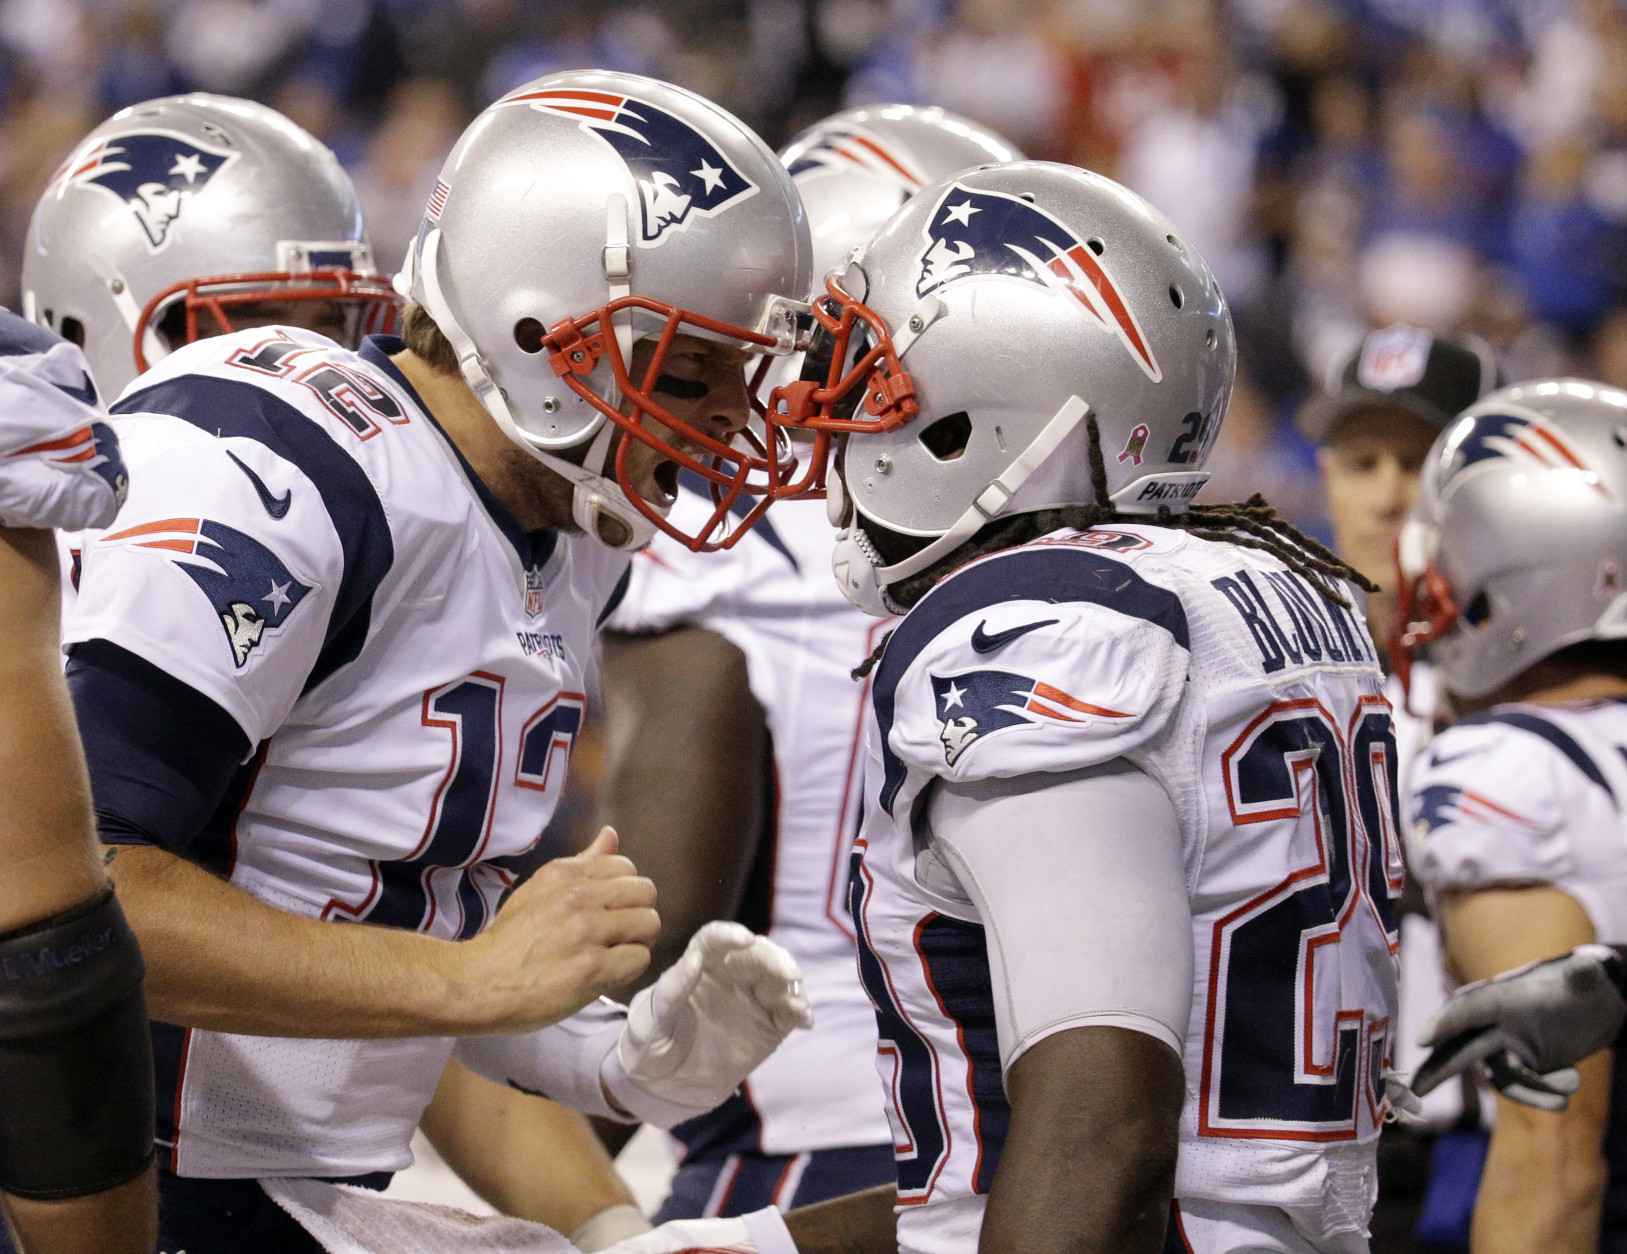 New England Patriots running back LeGarrette Blount (29) celebrates a touchdown with quarterback Tom Brady (12) in the second half of an NFL football game against the Indianapolis Colts in Indianapolis, Sunday, Oct. 18, 2015. (AP Photo/John Minchillo)